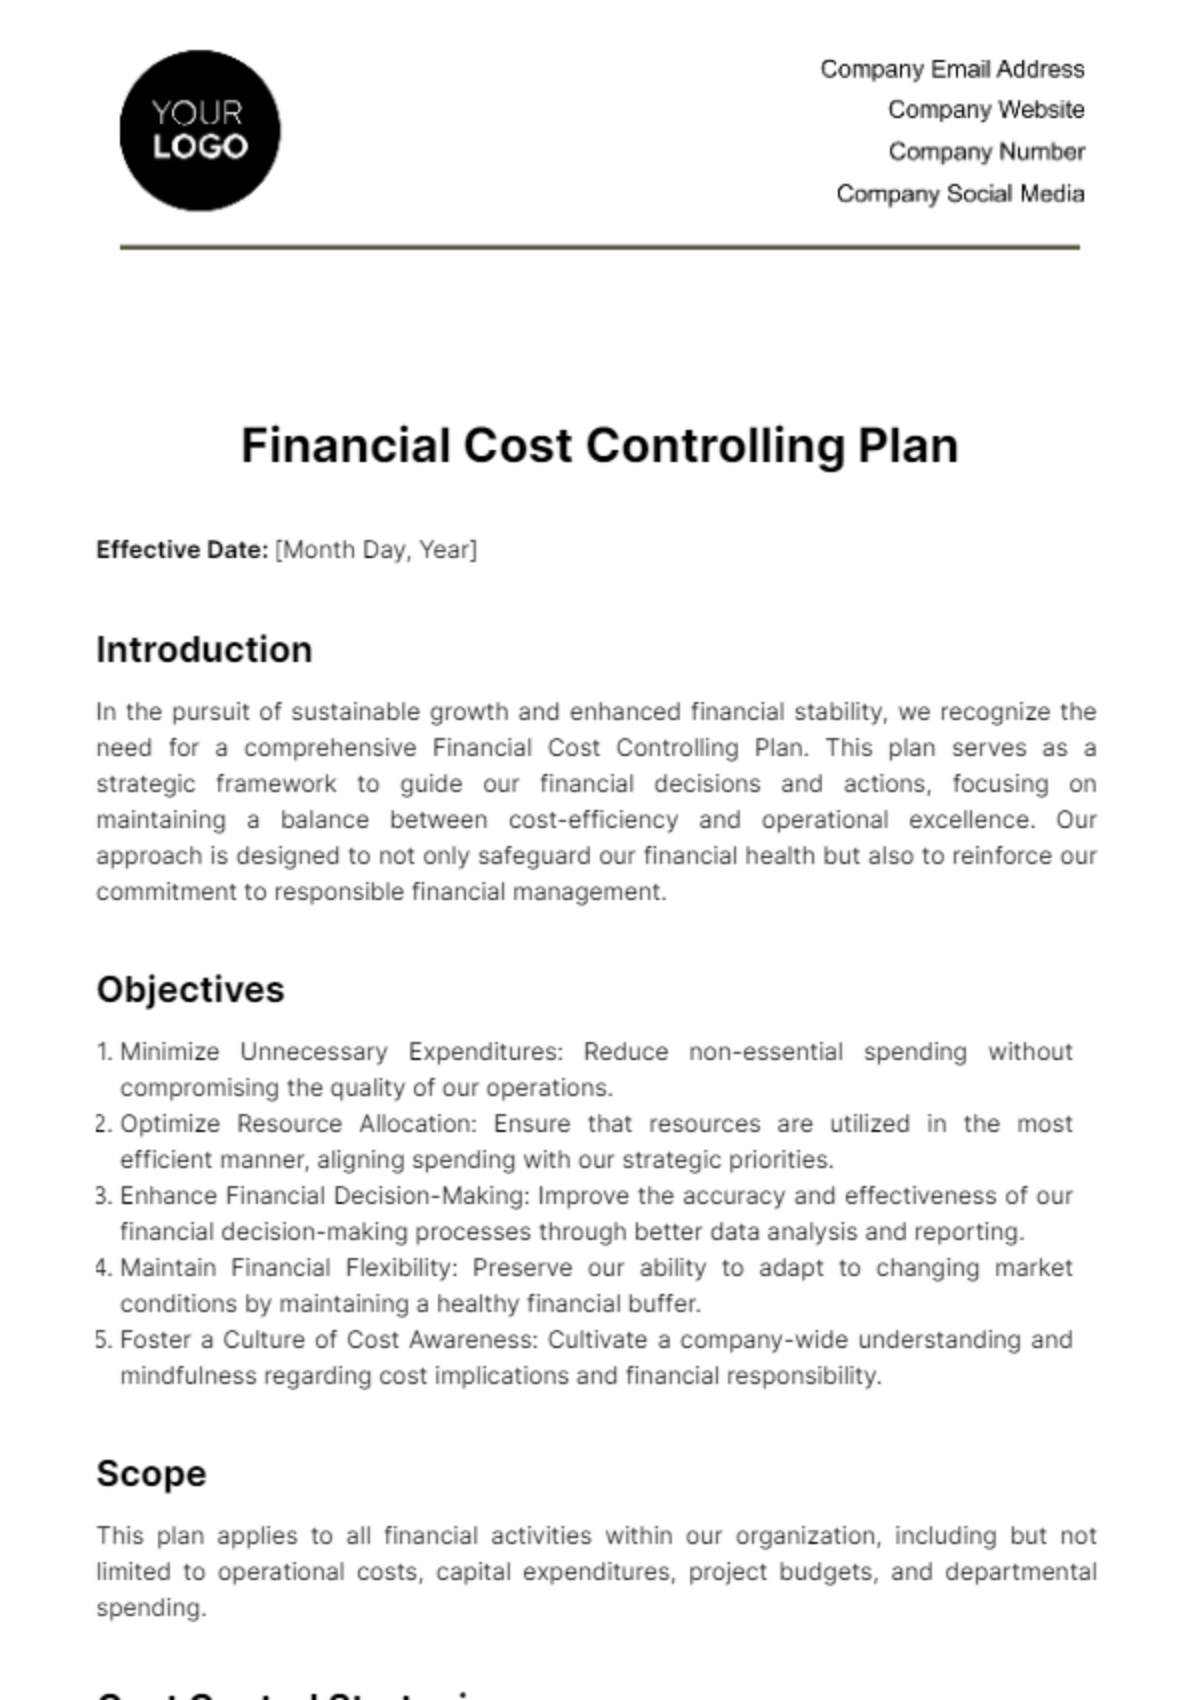 Financial Cost Controlling Plan Template